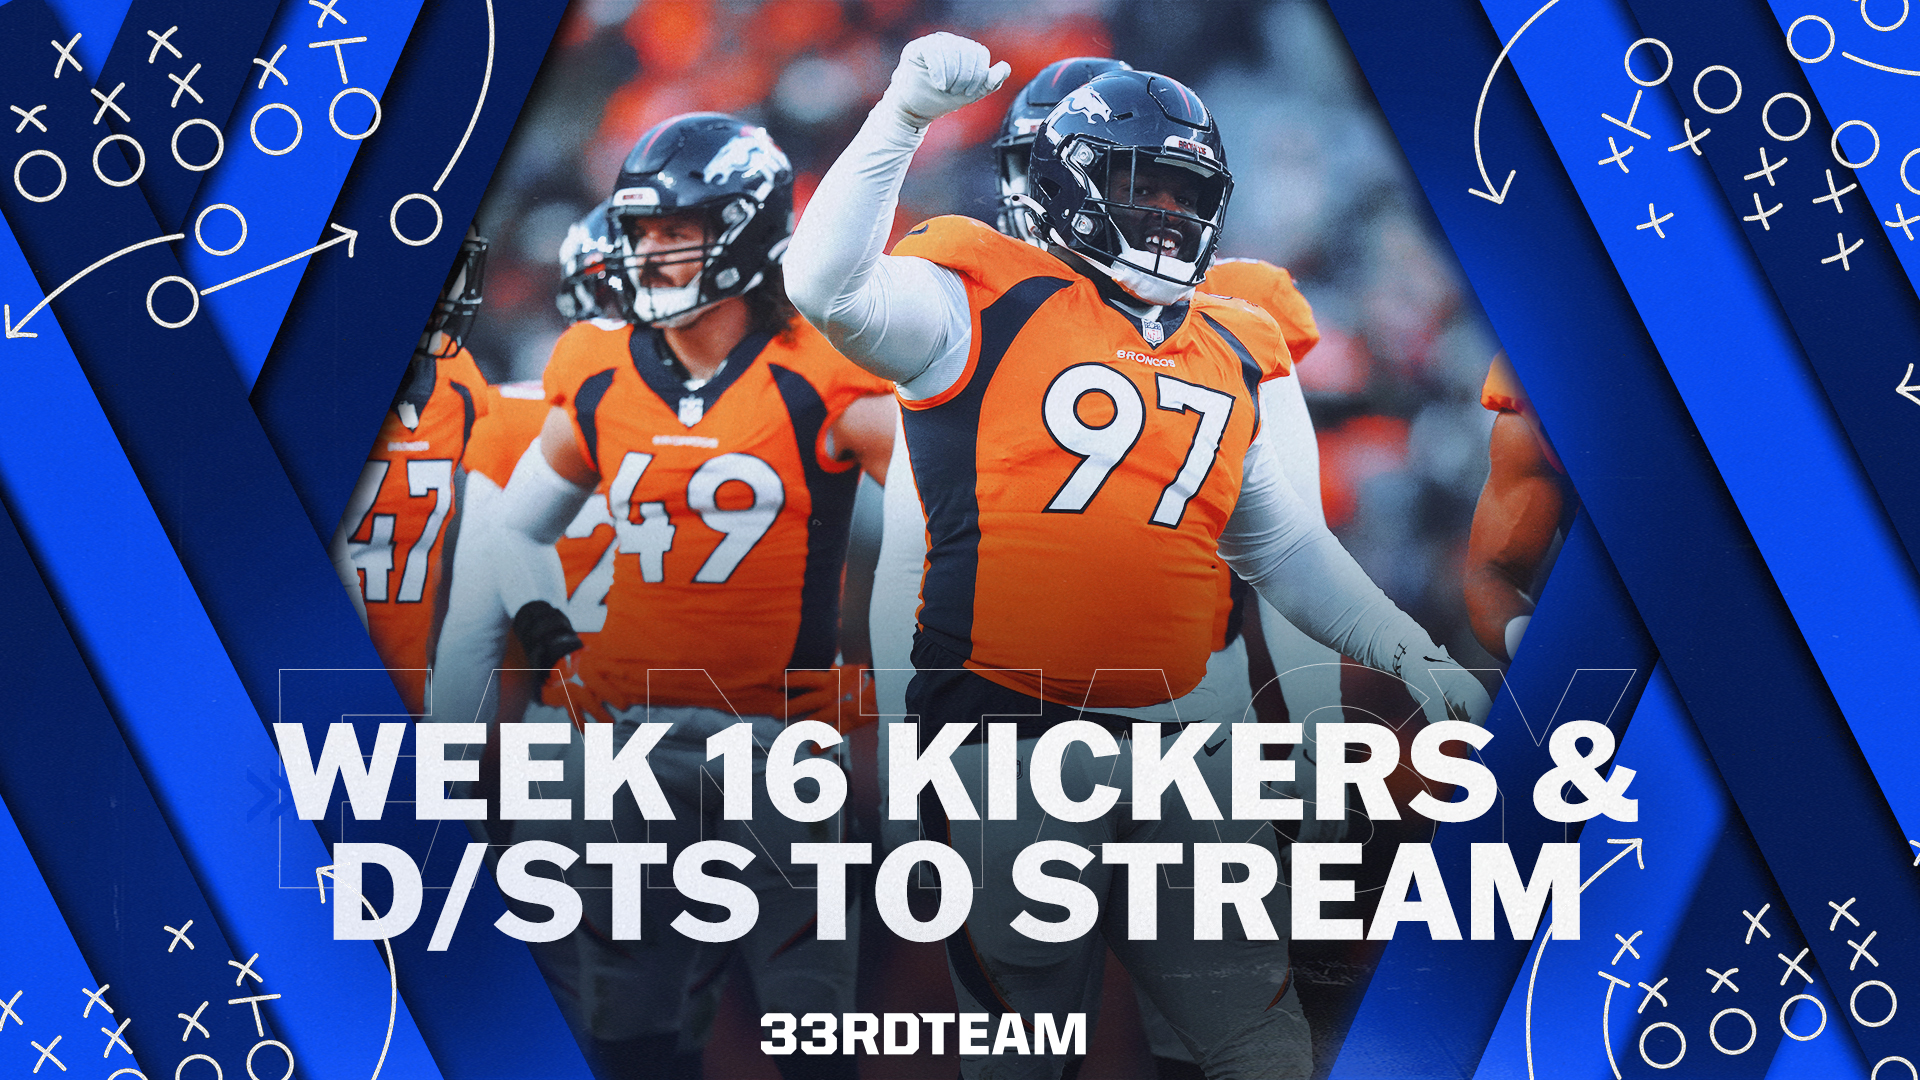 Fantasy Football Defenses and Kickers to Stream for Week 16